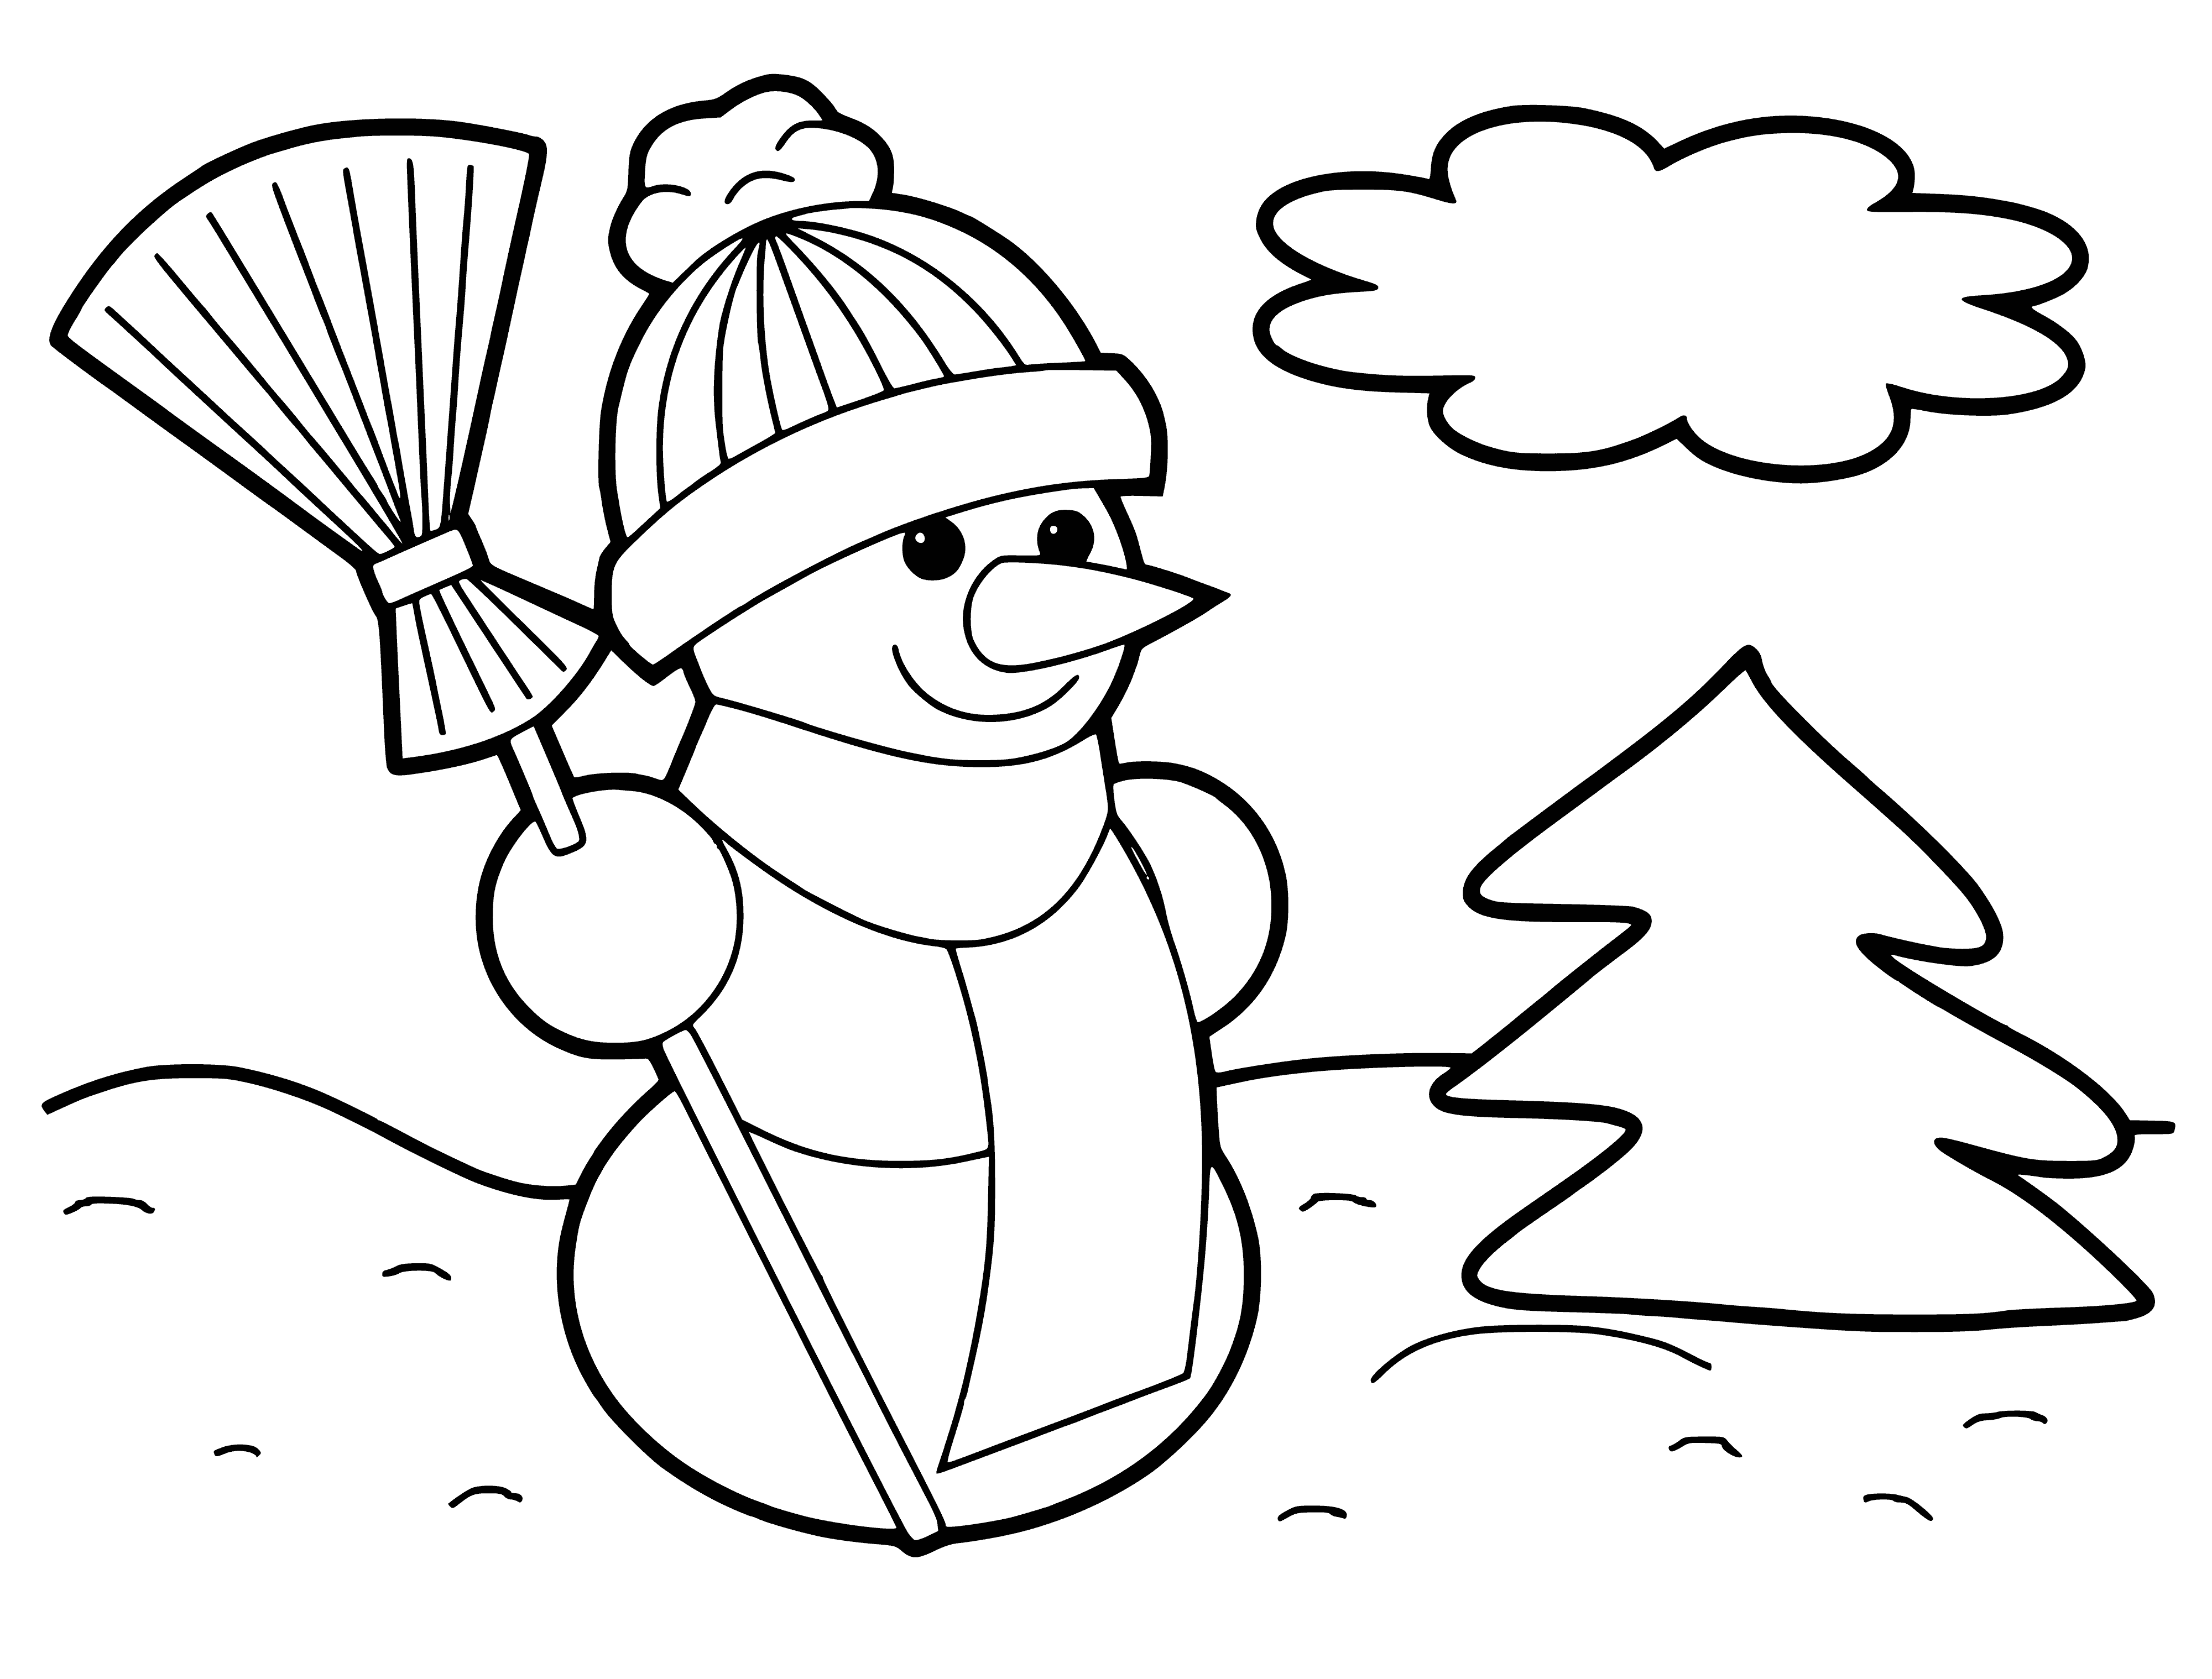 coloring page: Snowman w/ broom at Xmas tree. Lump head, carrot nose, coal eyes, black top hat, red scarf + twig arms, broom in hand. Snow on ground.